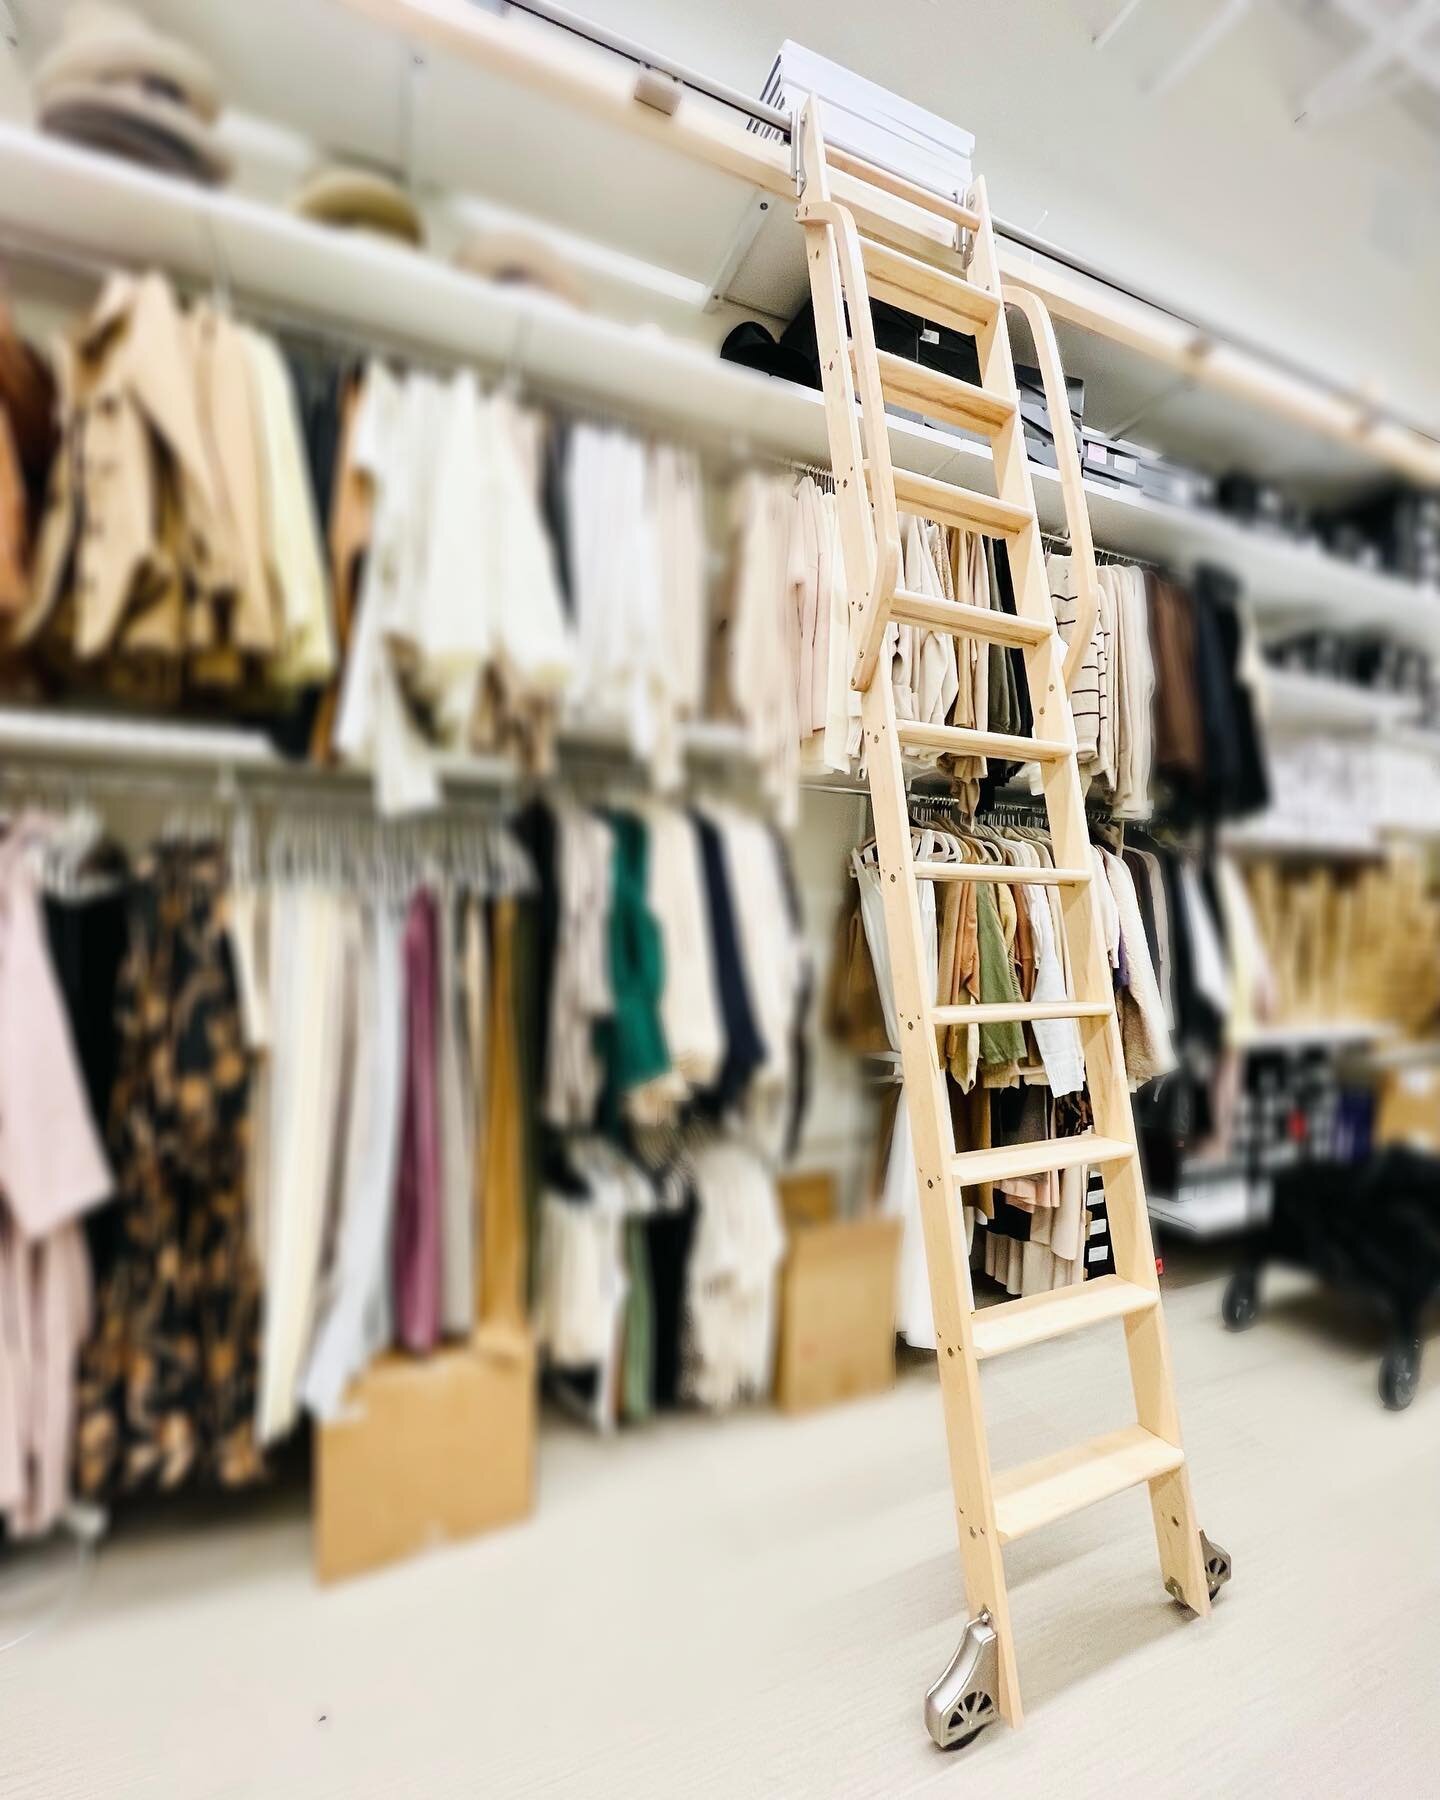 I'm not sure if we channeled our inner Belle or Olivander's, but either way, I custom designed this library ladder to make life easier in the stock room. We maximized space by going up to 10' with the custom shelving system on the wall. The functiona